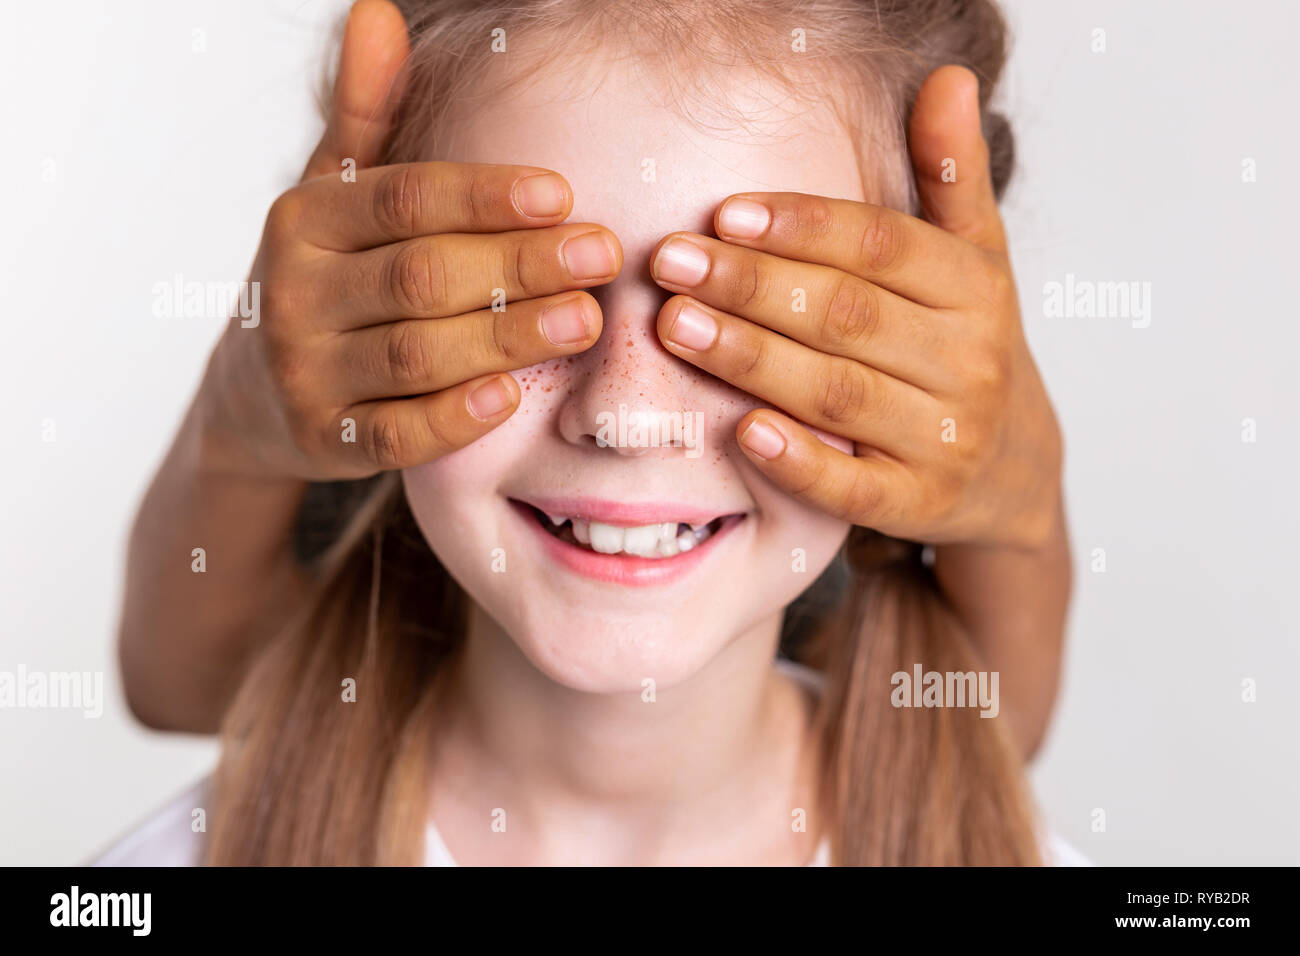 Contented pale girl with bright freckles having closed eyes Stock Photo